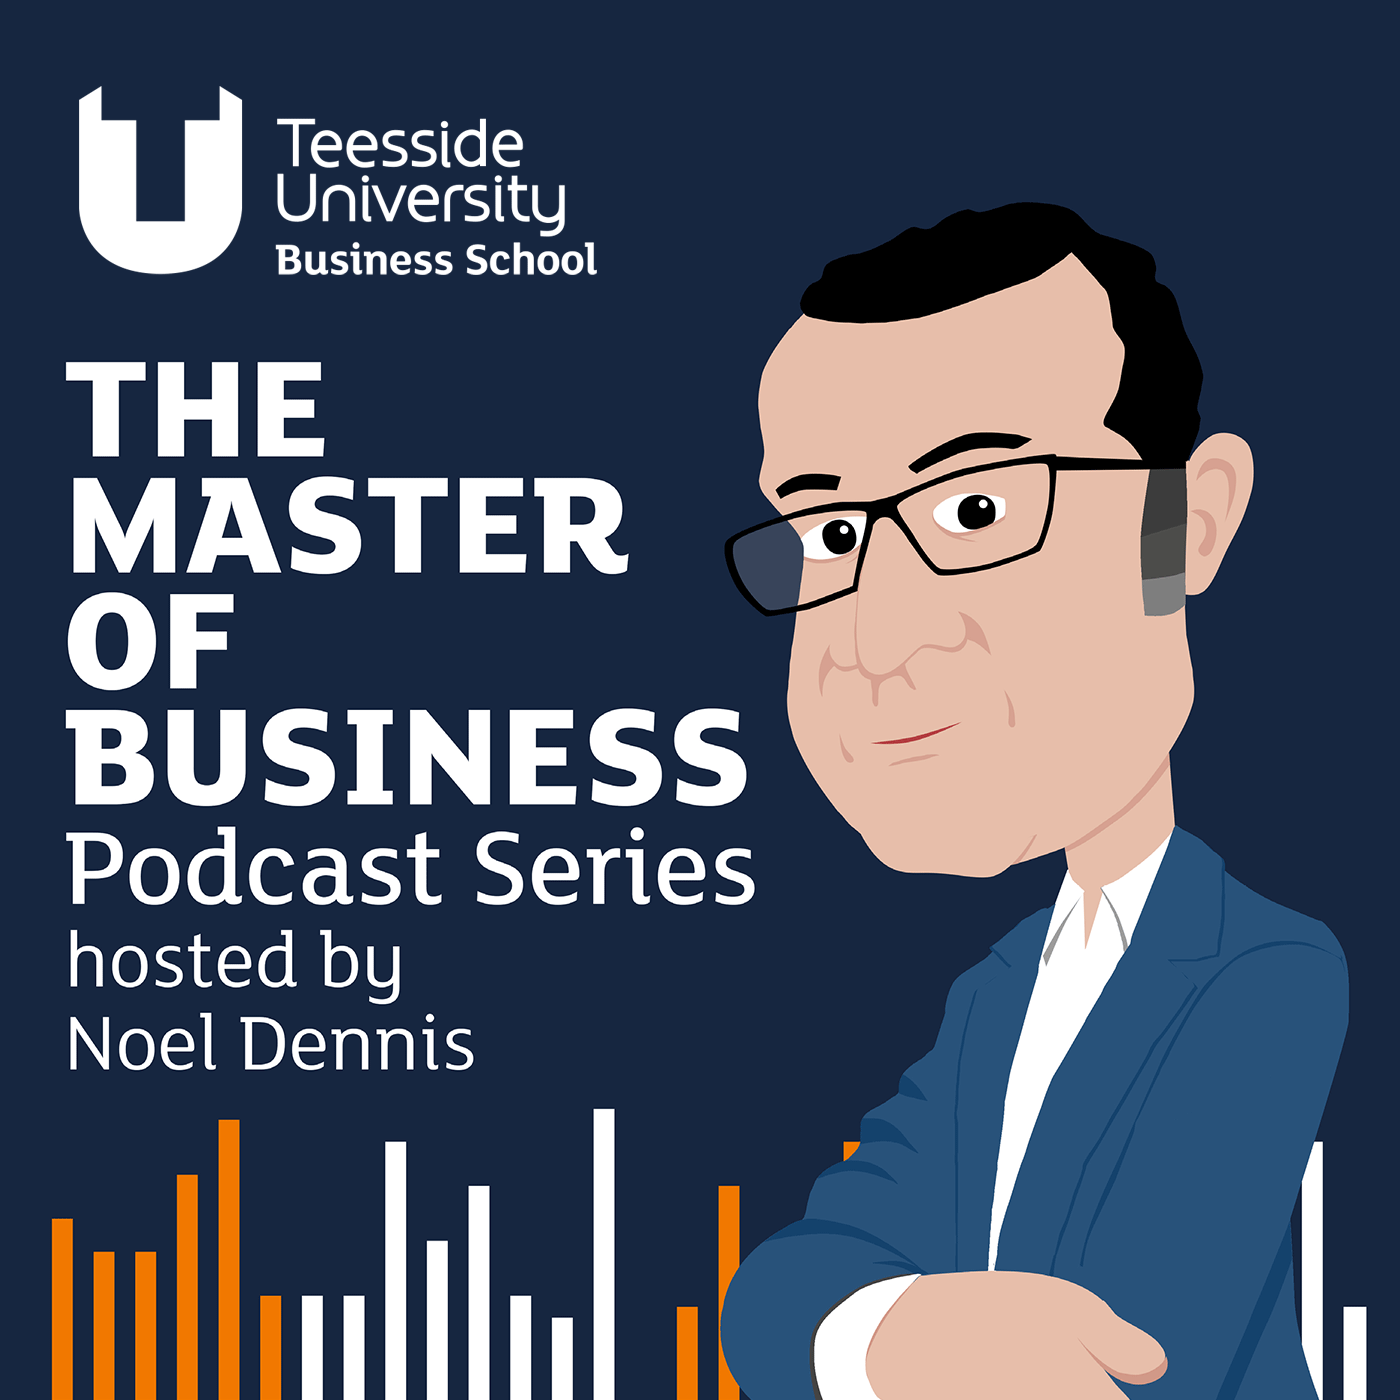 The Master of Business podcast series